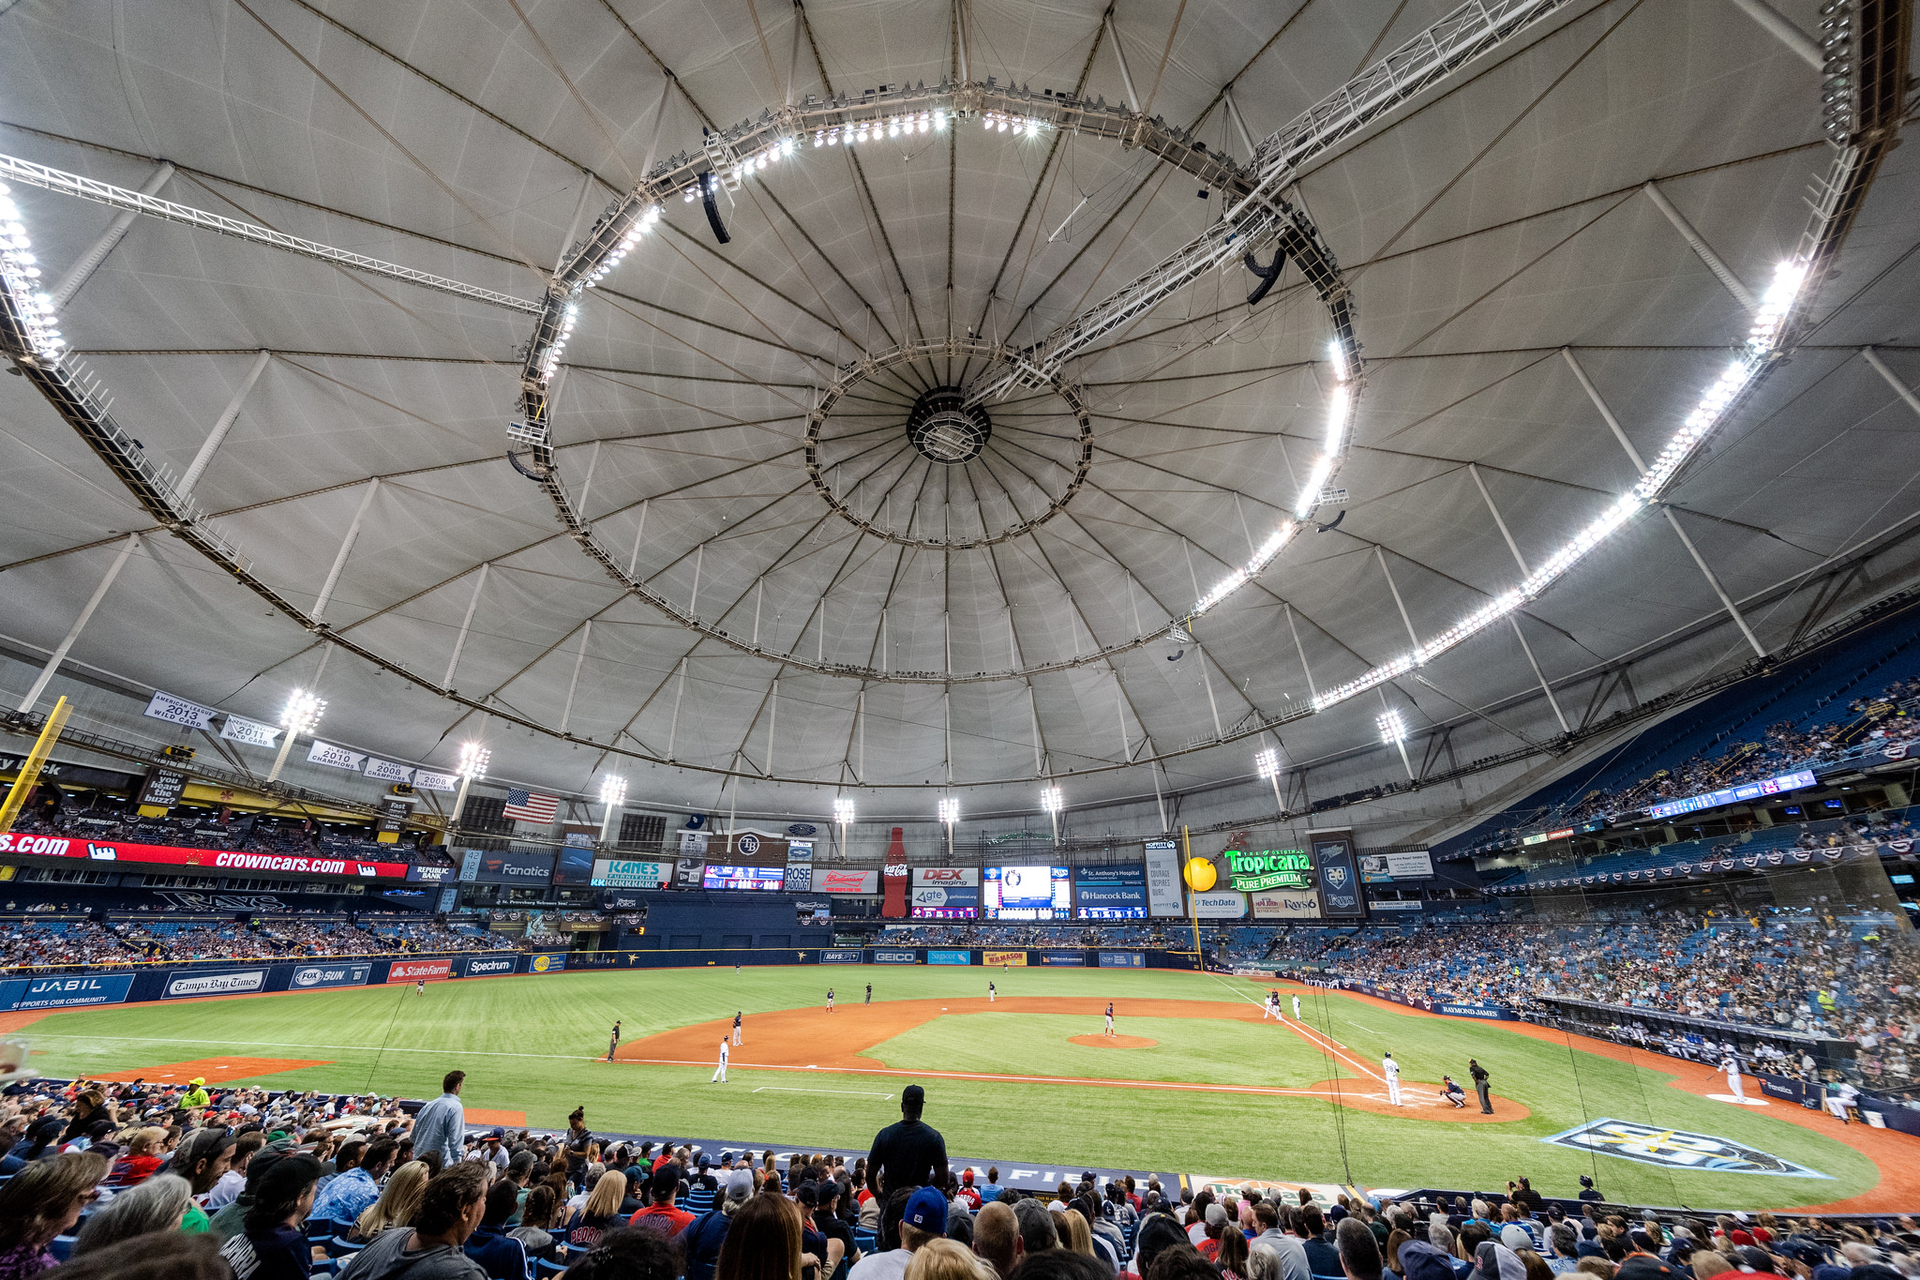 Tampa Bay Rays will close upper deck seating at Tropicana Field